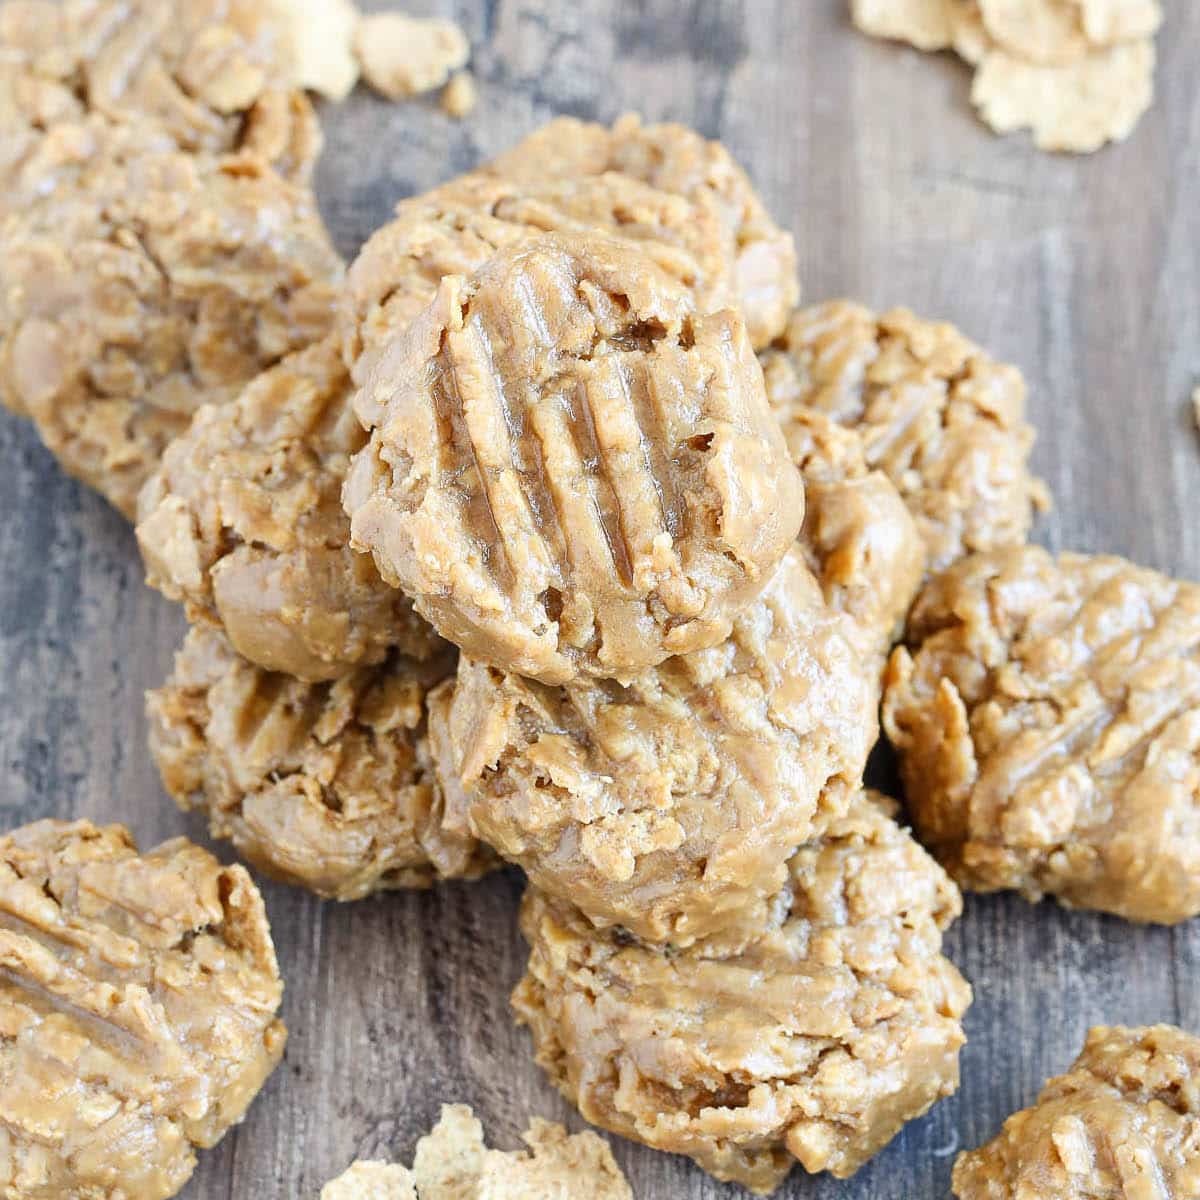 No Bake Peanut Butter Cookies stacked on wooden surface.